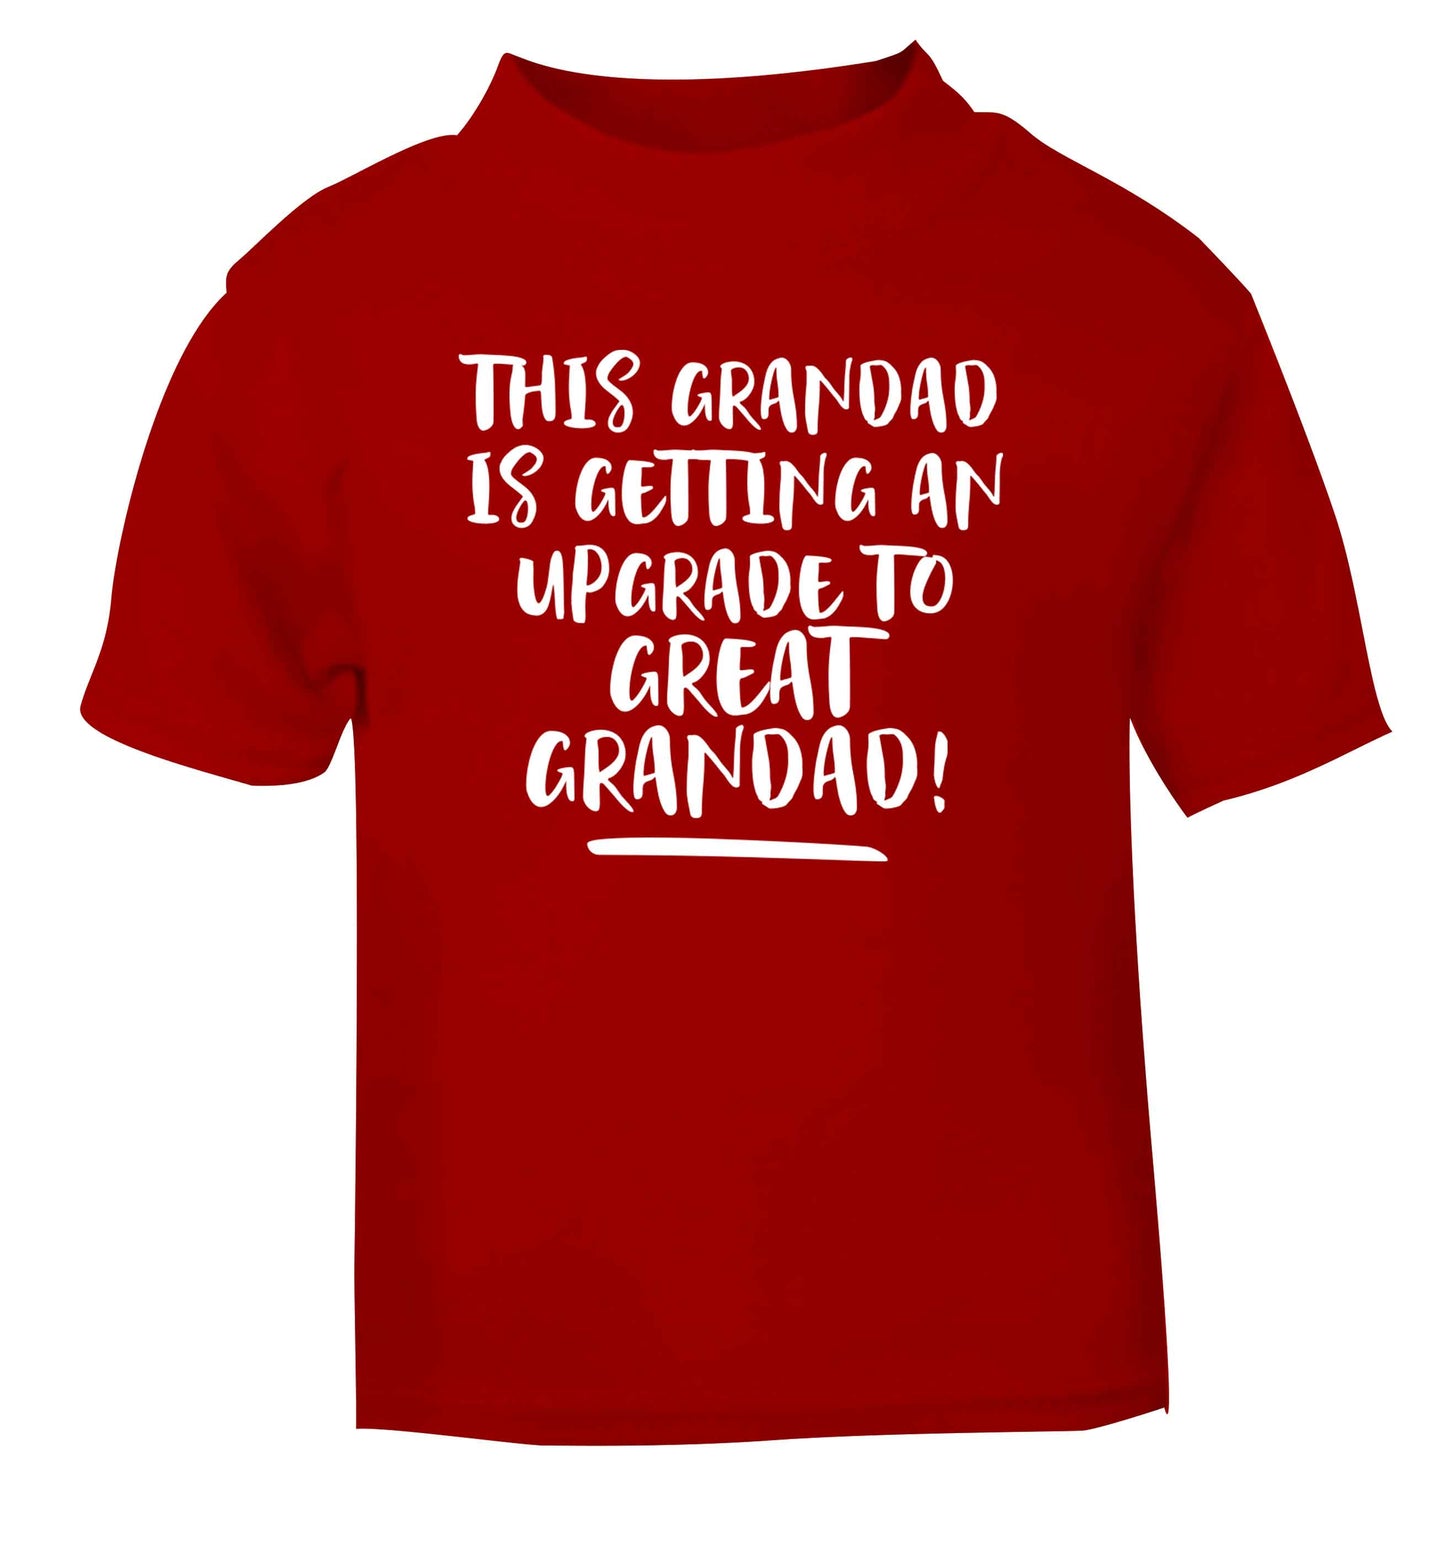 This grandad is getting an upgrade to great grandad! red Baby Toddler Tshirt 2 Years